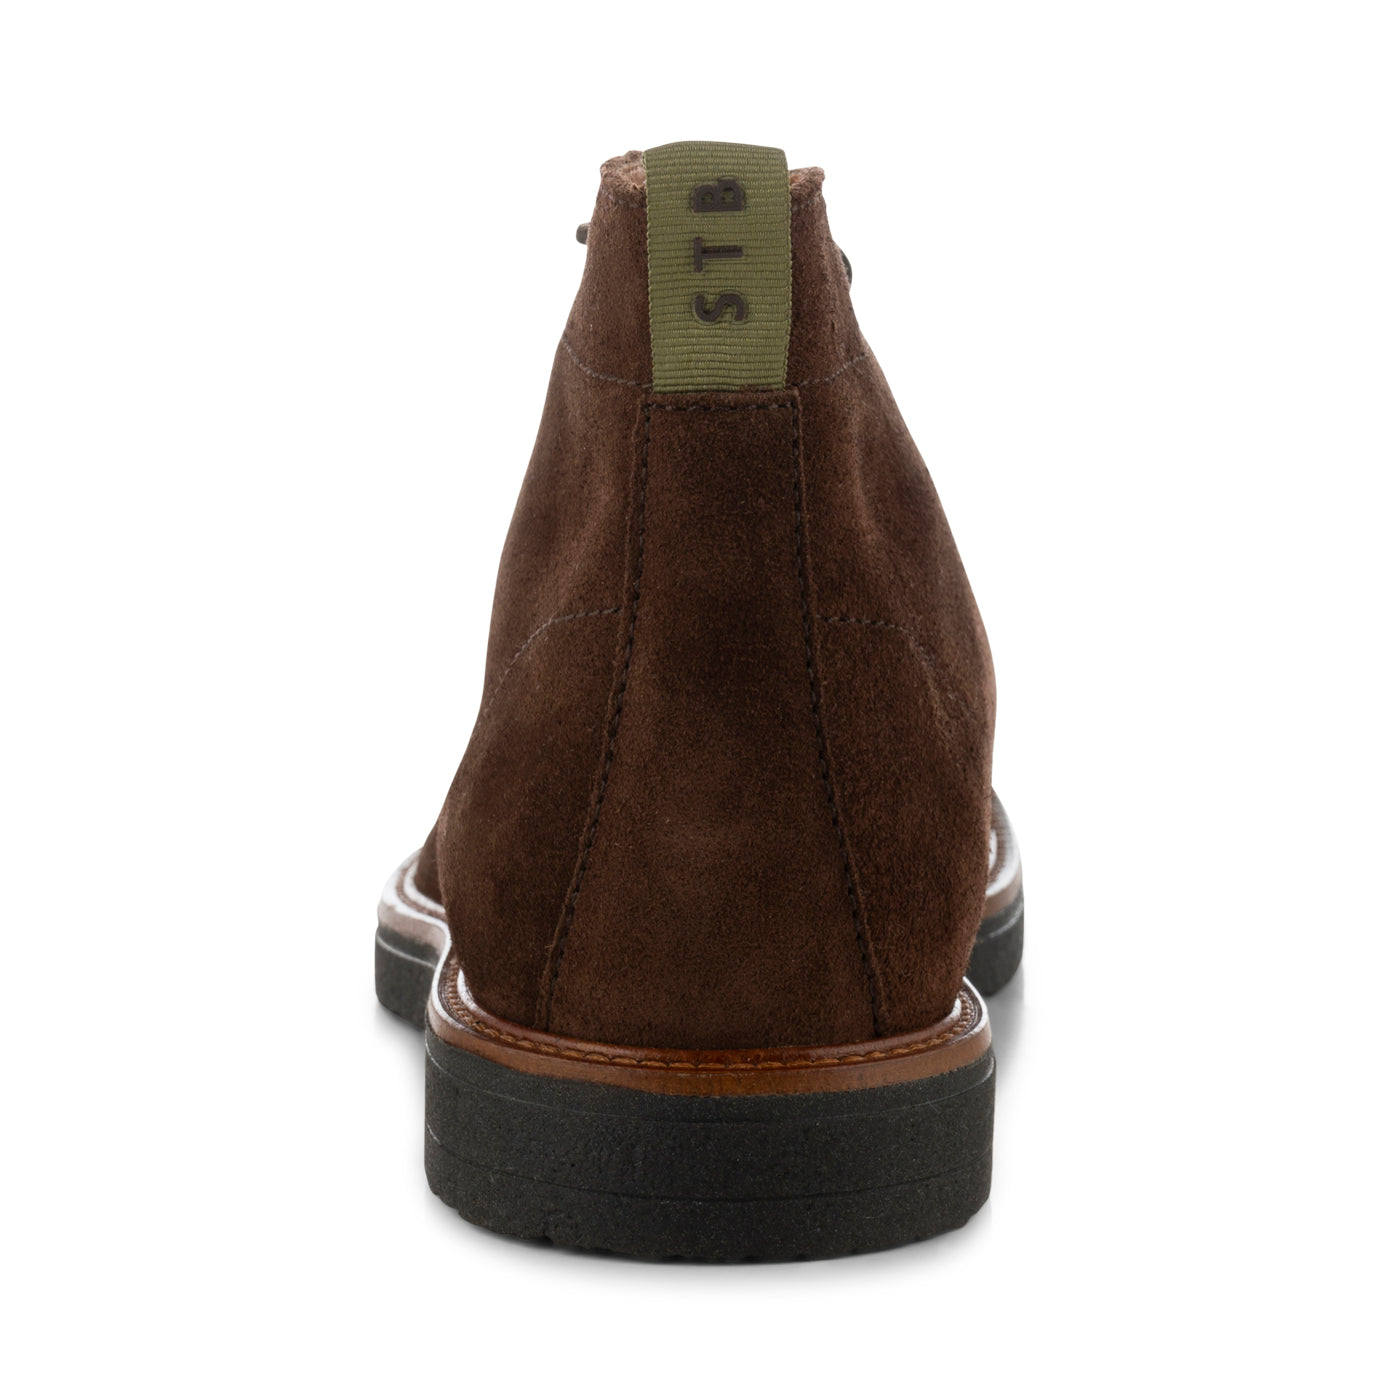 SHOE THE BEAR MENS Kip apron boot suede water repellent Boots 130 BROWN